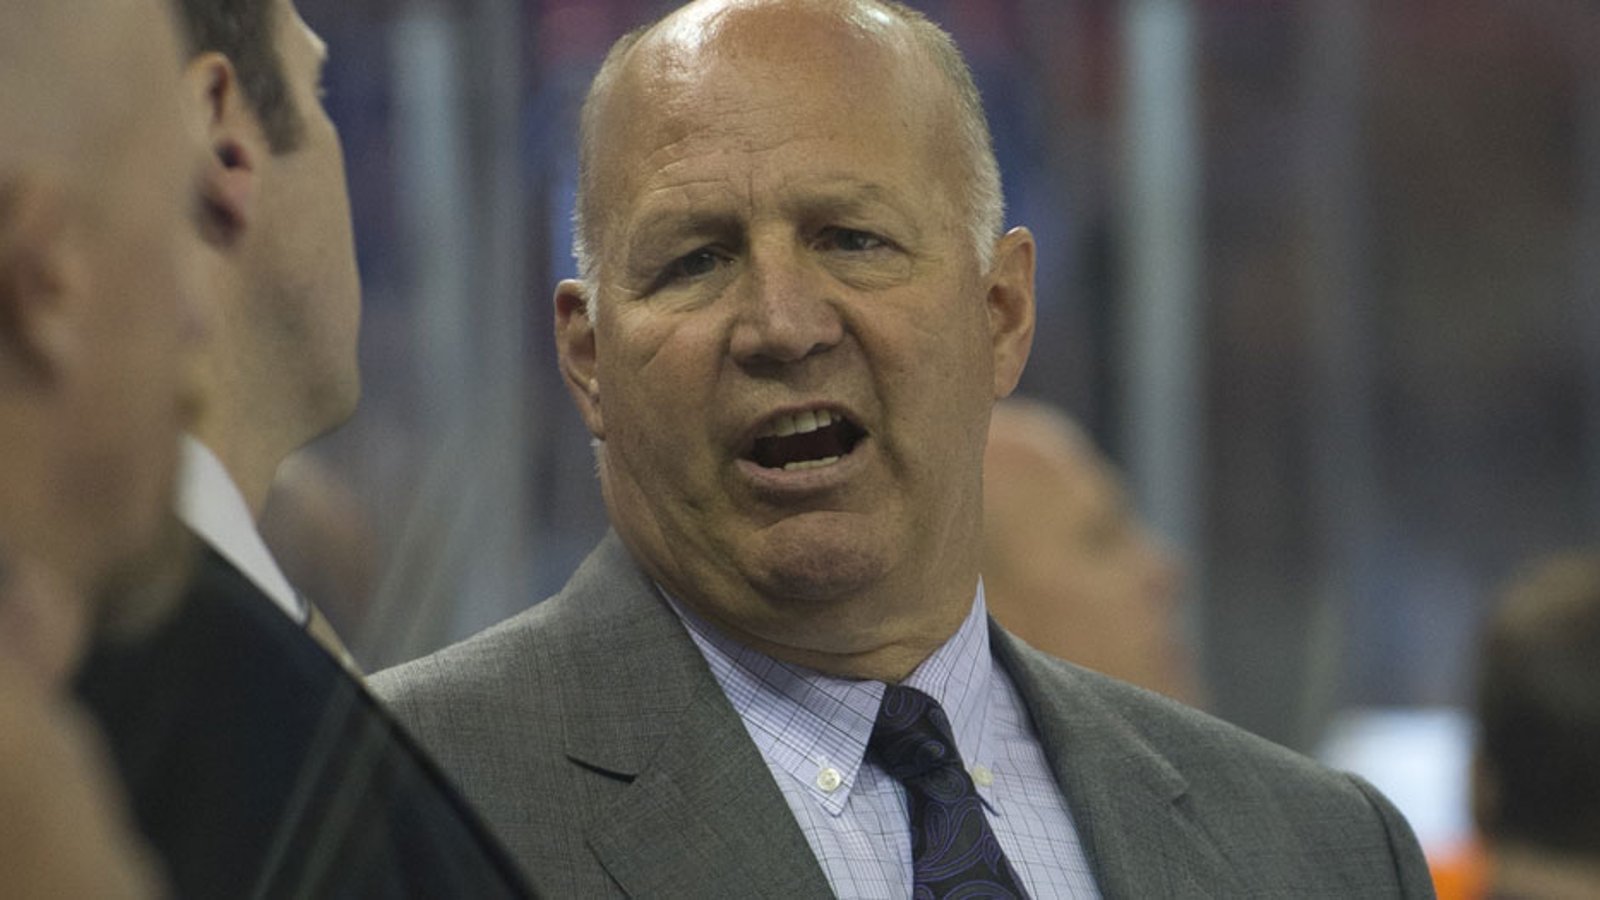 Breaking: Claude Julien makes a very satisfying comment for Bruins fans about Marchand and Bergeron!